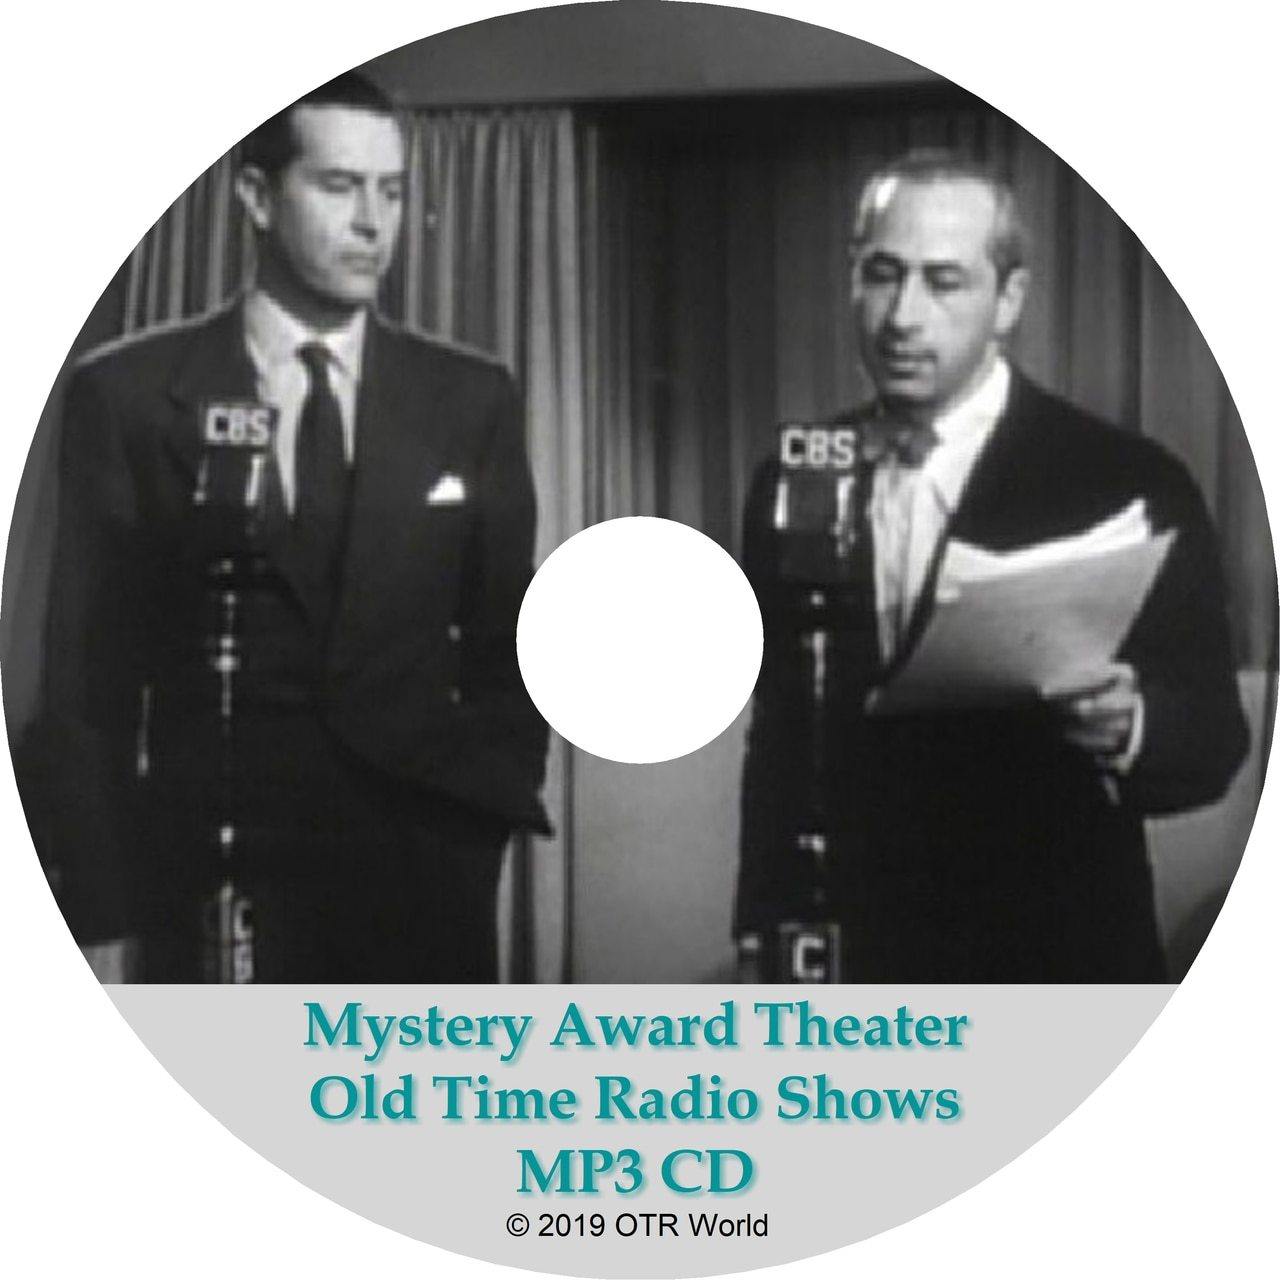 Mystery Award Theater Old Time Radio Shows 2 Episodes On MP3 CD - OTR World